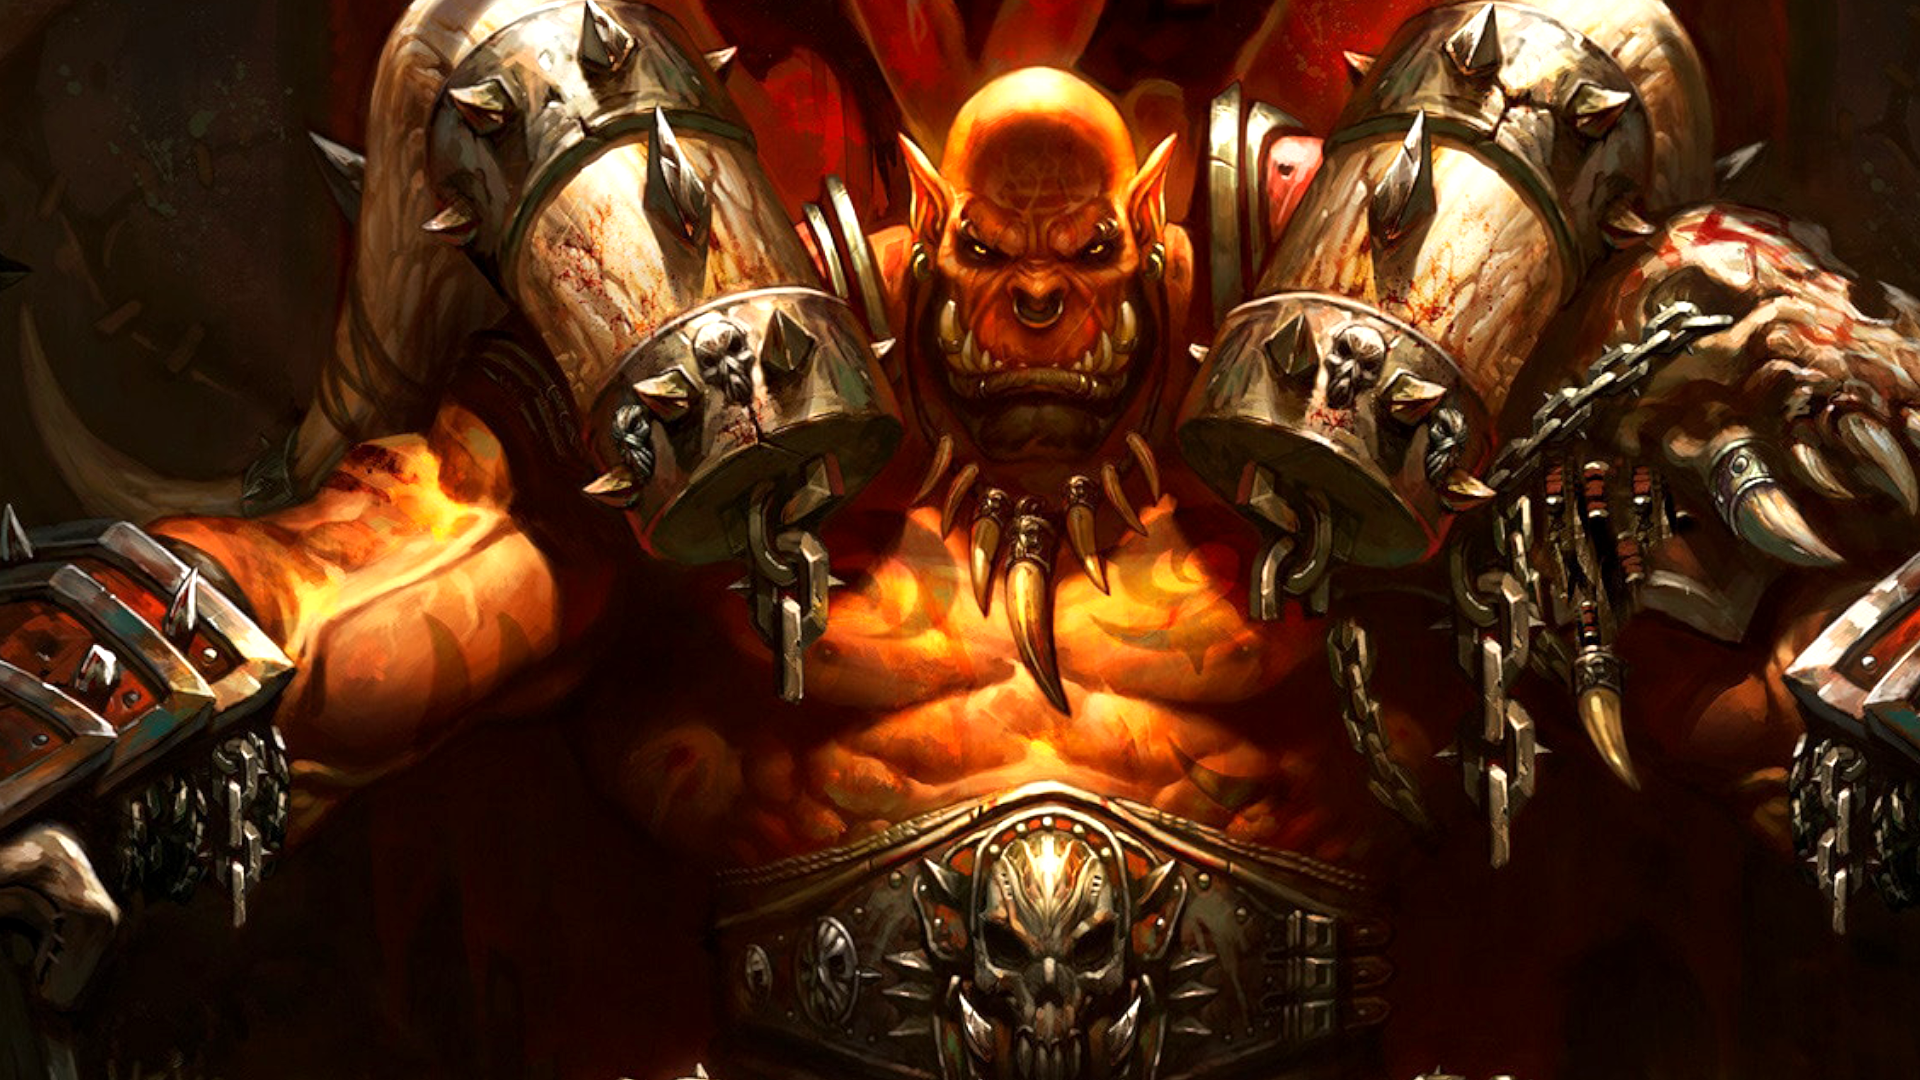 World of Warcraft boss says Microsoft is happy to ‘let Blizzard be Blizzard,’ but I’m not sure that’s entirely true